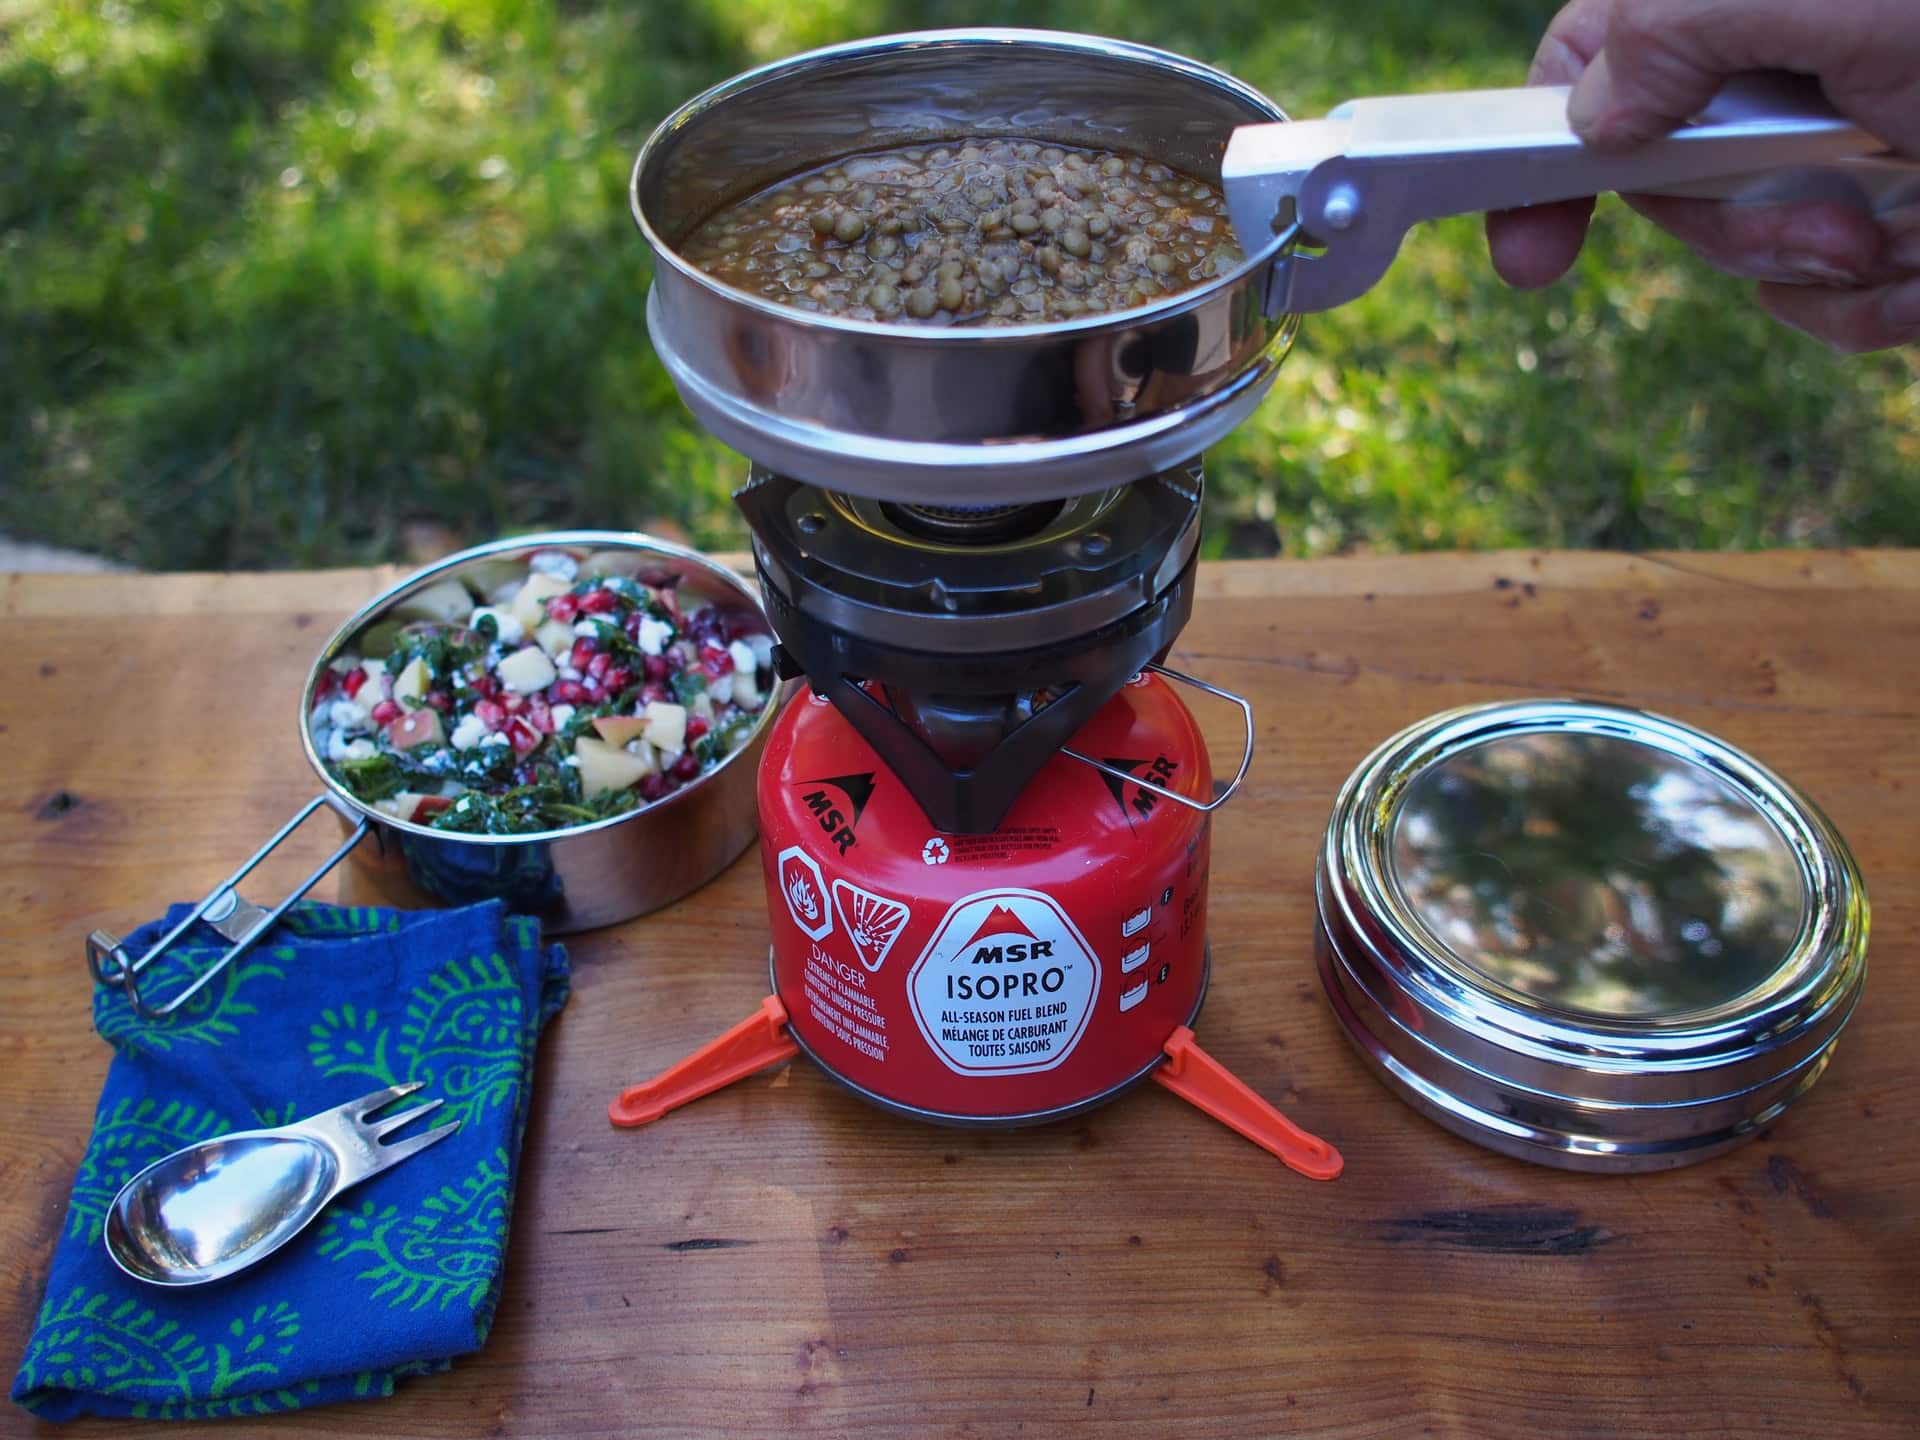 7 Tips On How To Make Dehydrated Food For Camping Or Canoeing Tasty And Delicious